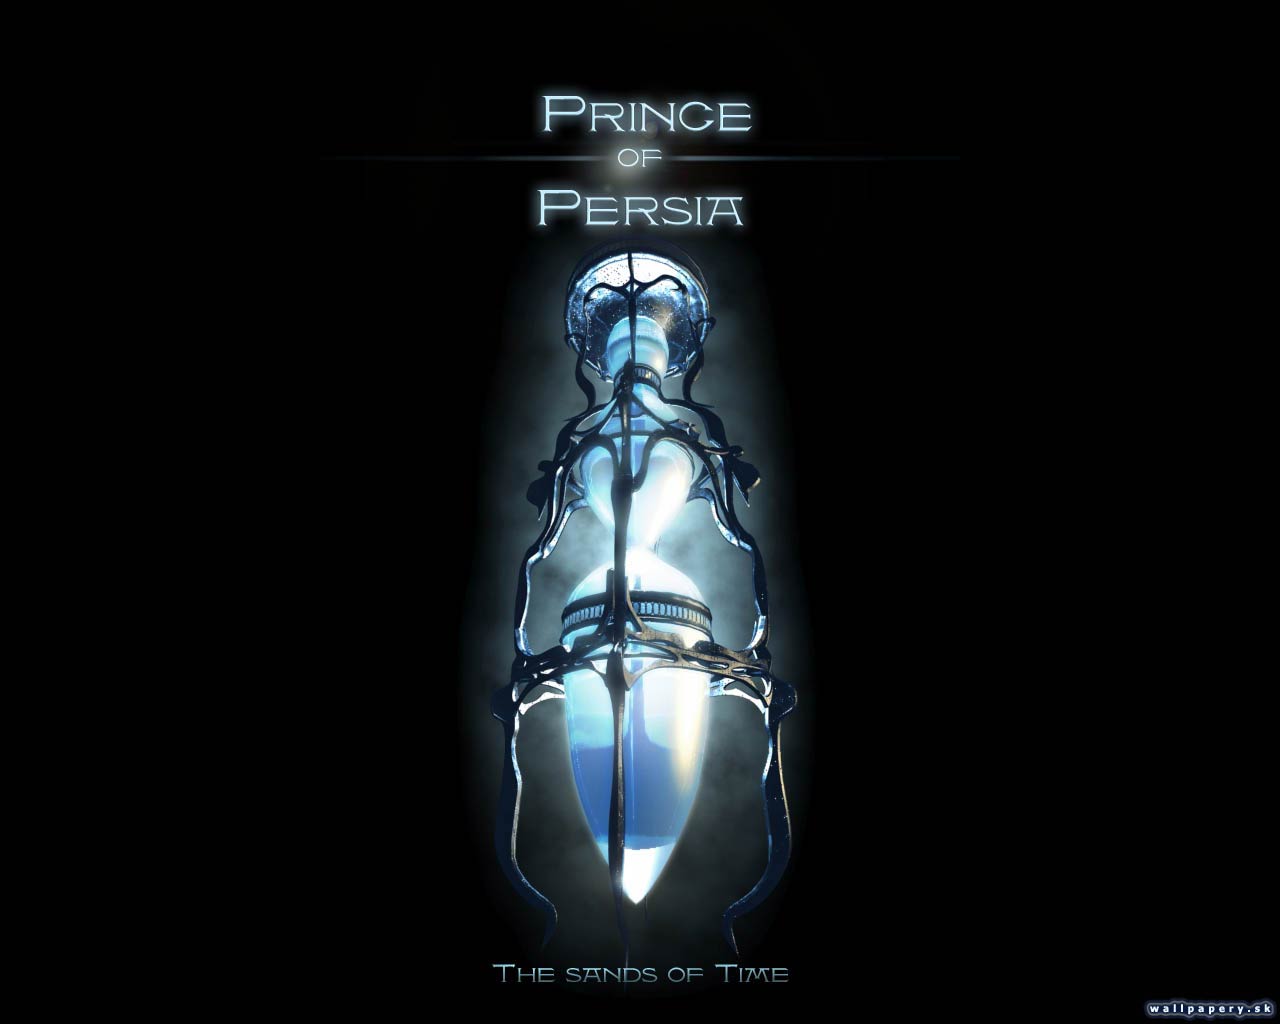 Prince of Persia: The Sands of Time - wallpaper 6